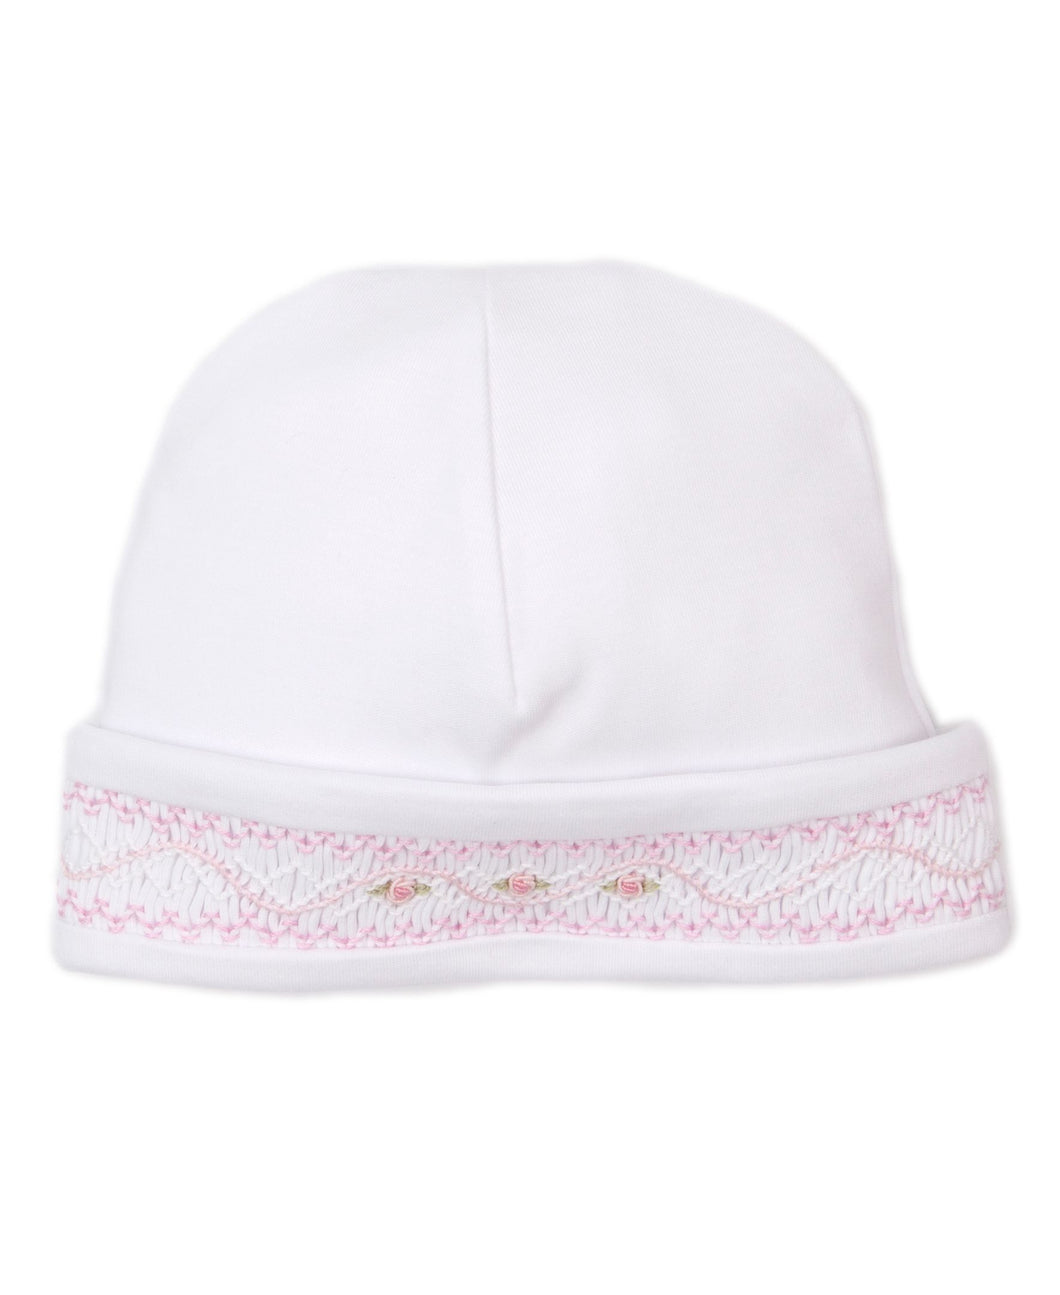 CLB Summer 21 Smocked White and Pink Hat